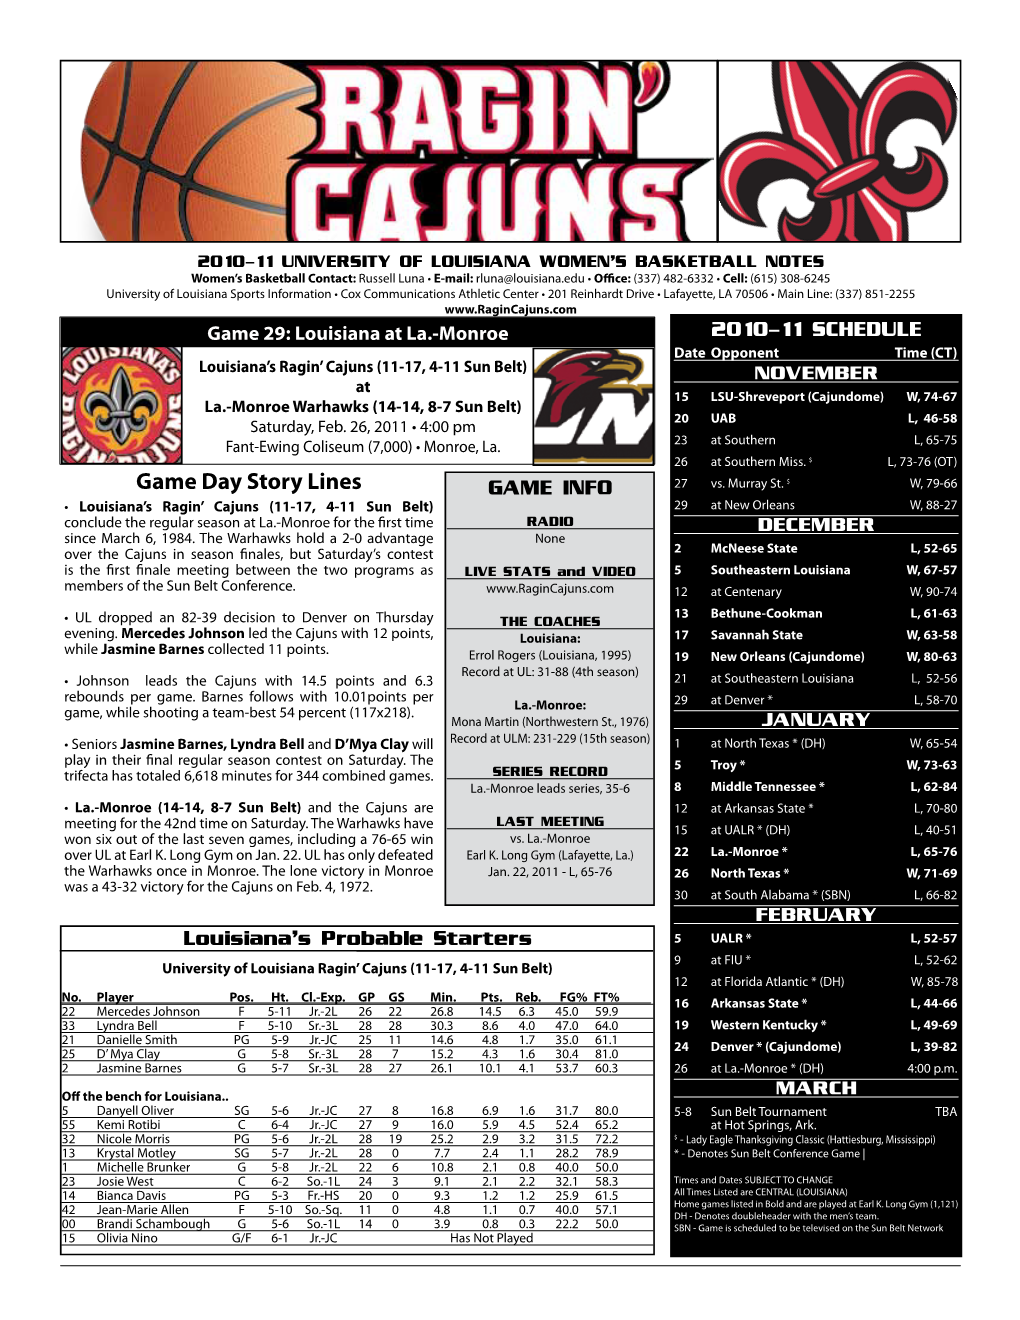 Game Day Story Lines GAME INFO 27 Vs